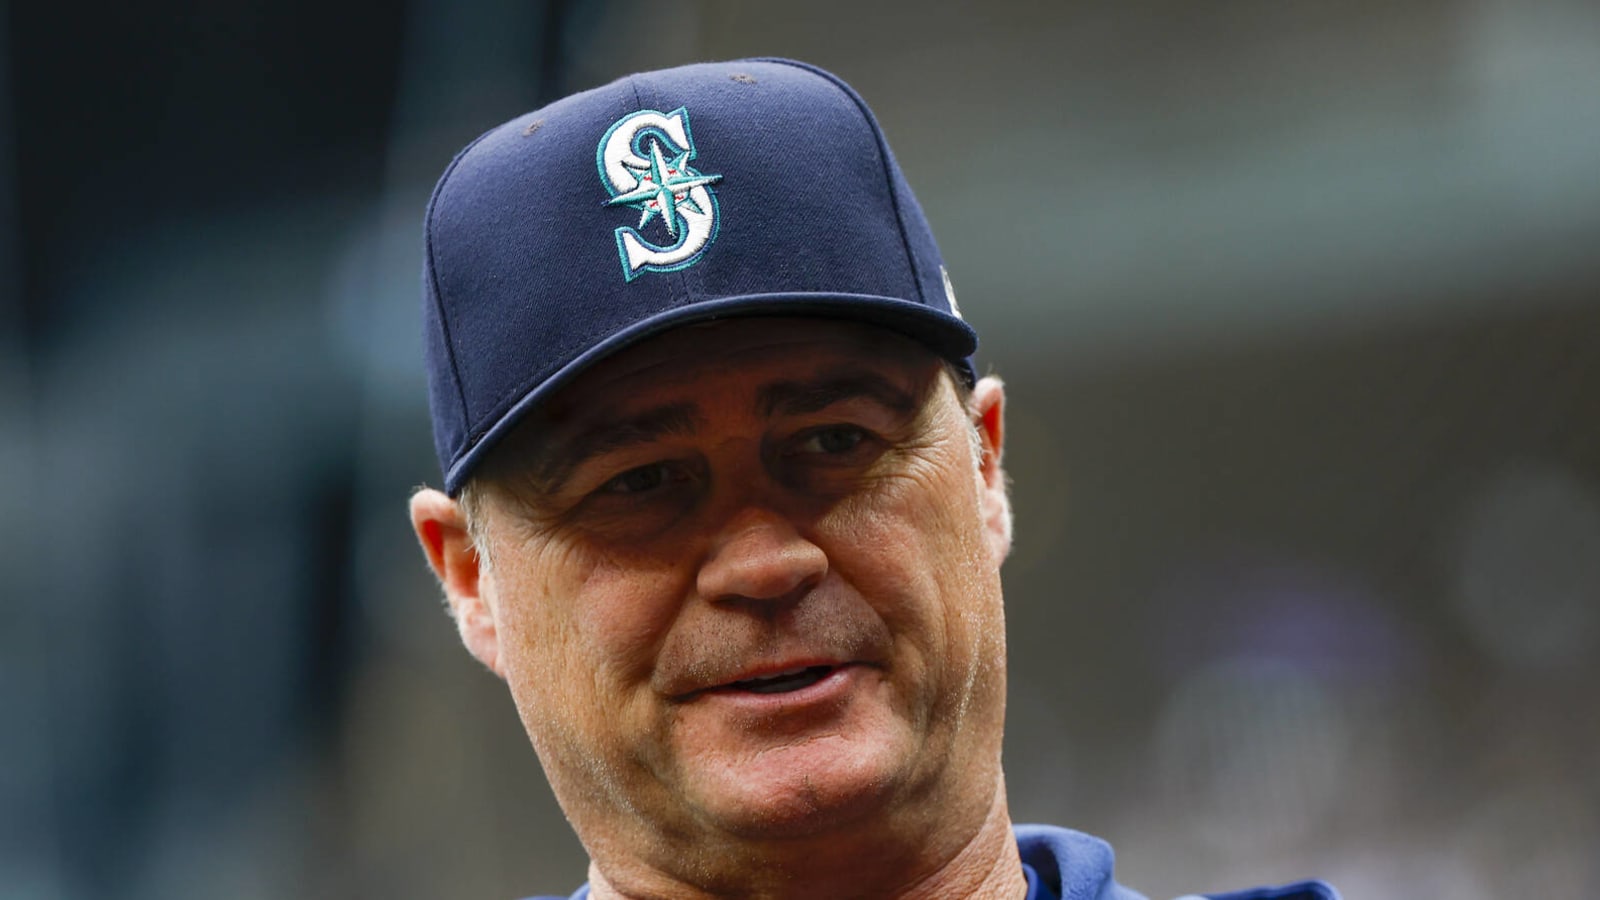 Mariners manager Scott Servais feels a little more settled heading